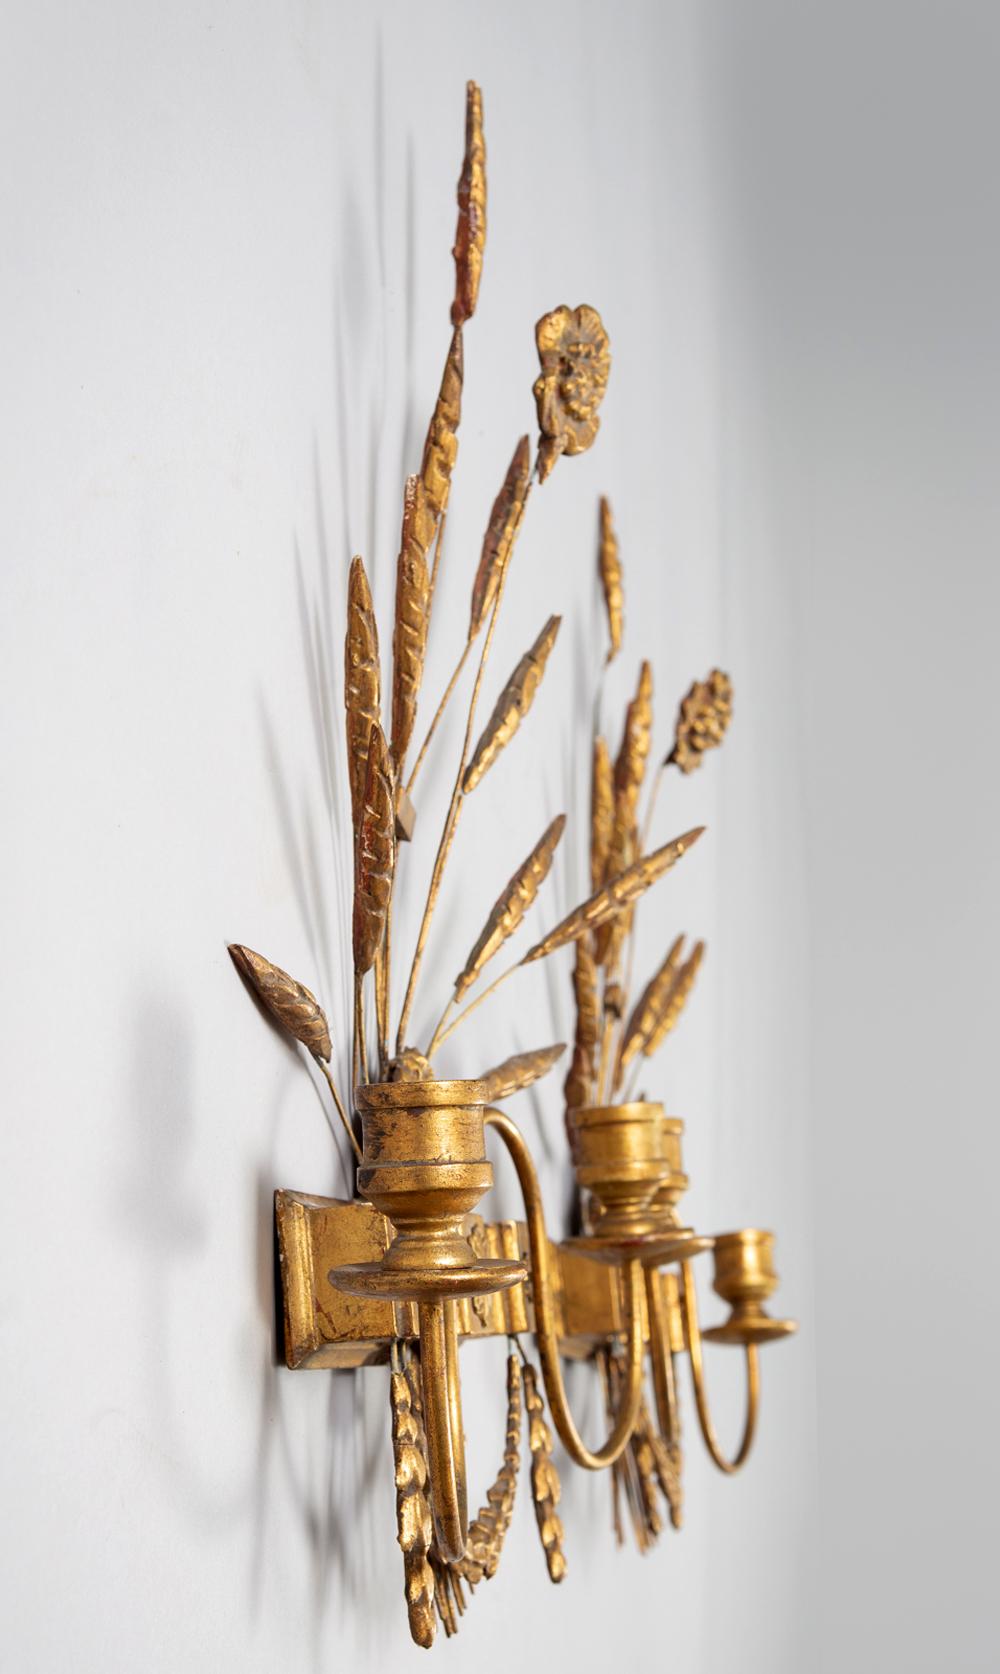 Pair French giltwood two-arm wall sconces in the shape of sheaths of wheat. At present they are not electrified but can easily be.